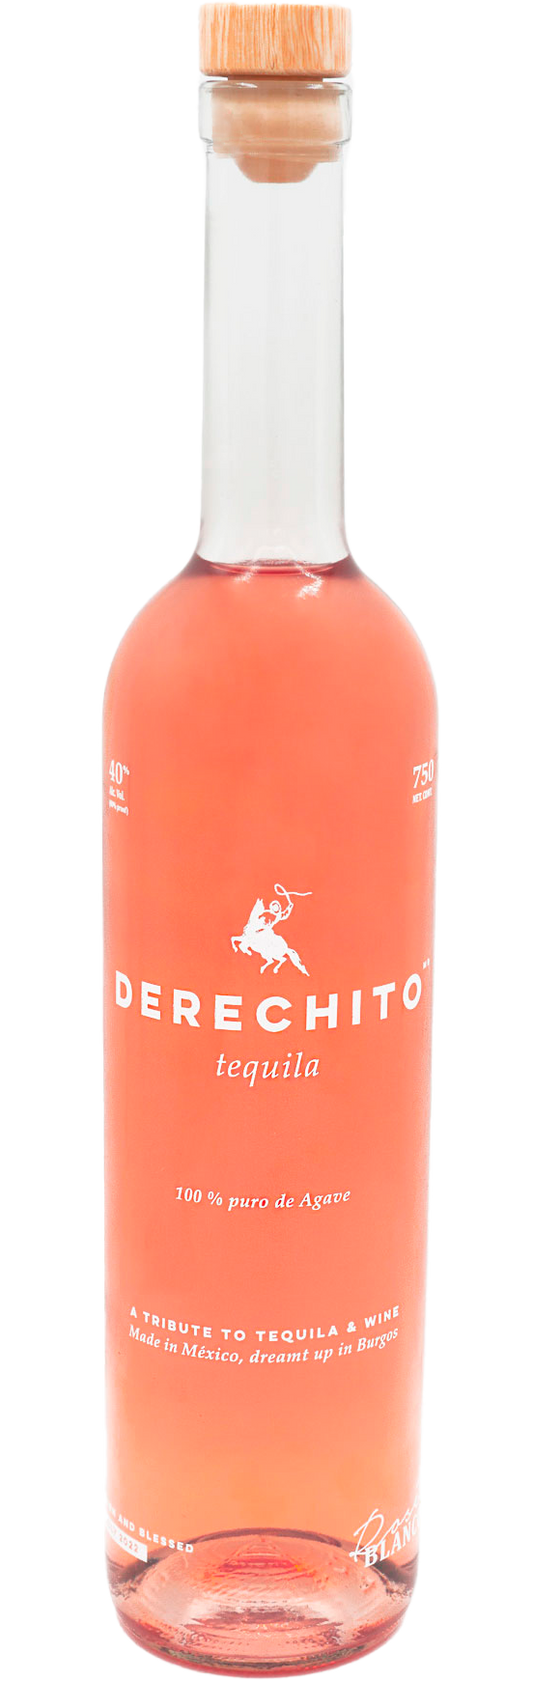 DERECHITO TEQUILA BLANCO ROSE LIMITED COLLECTION 750ML